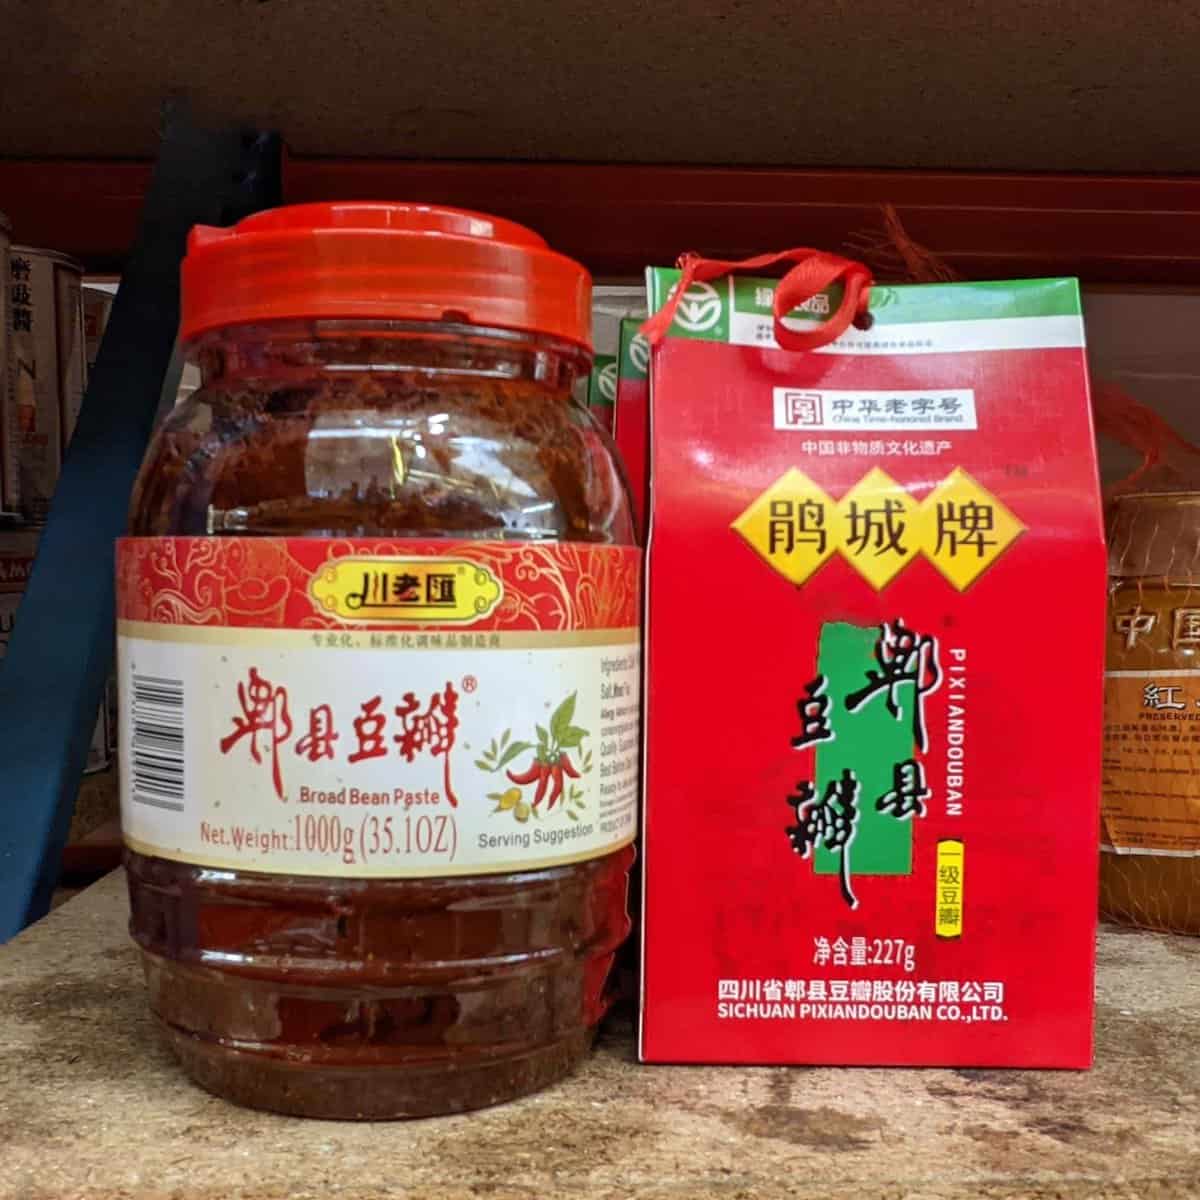 Pixian Douban in a jar and a paper packaging.